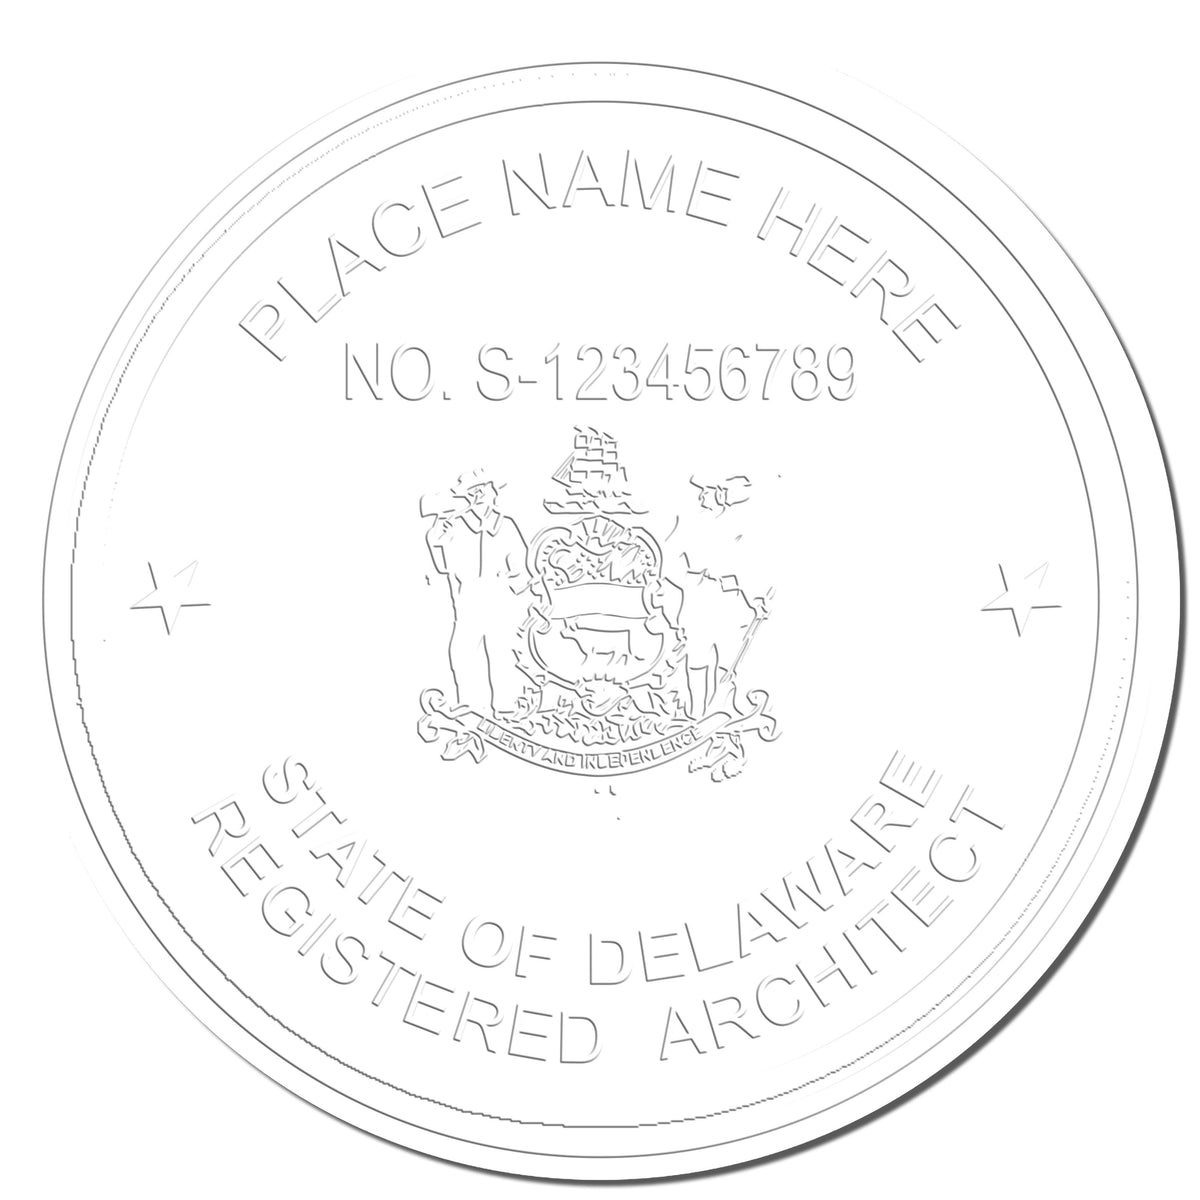 A photograph of the Extended Long Reach Delaware Architect Seal Embosser stamp impression reveals a vivid, professional image of the on paper.